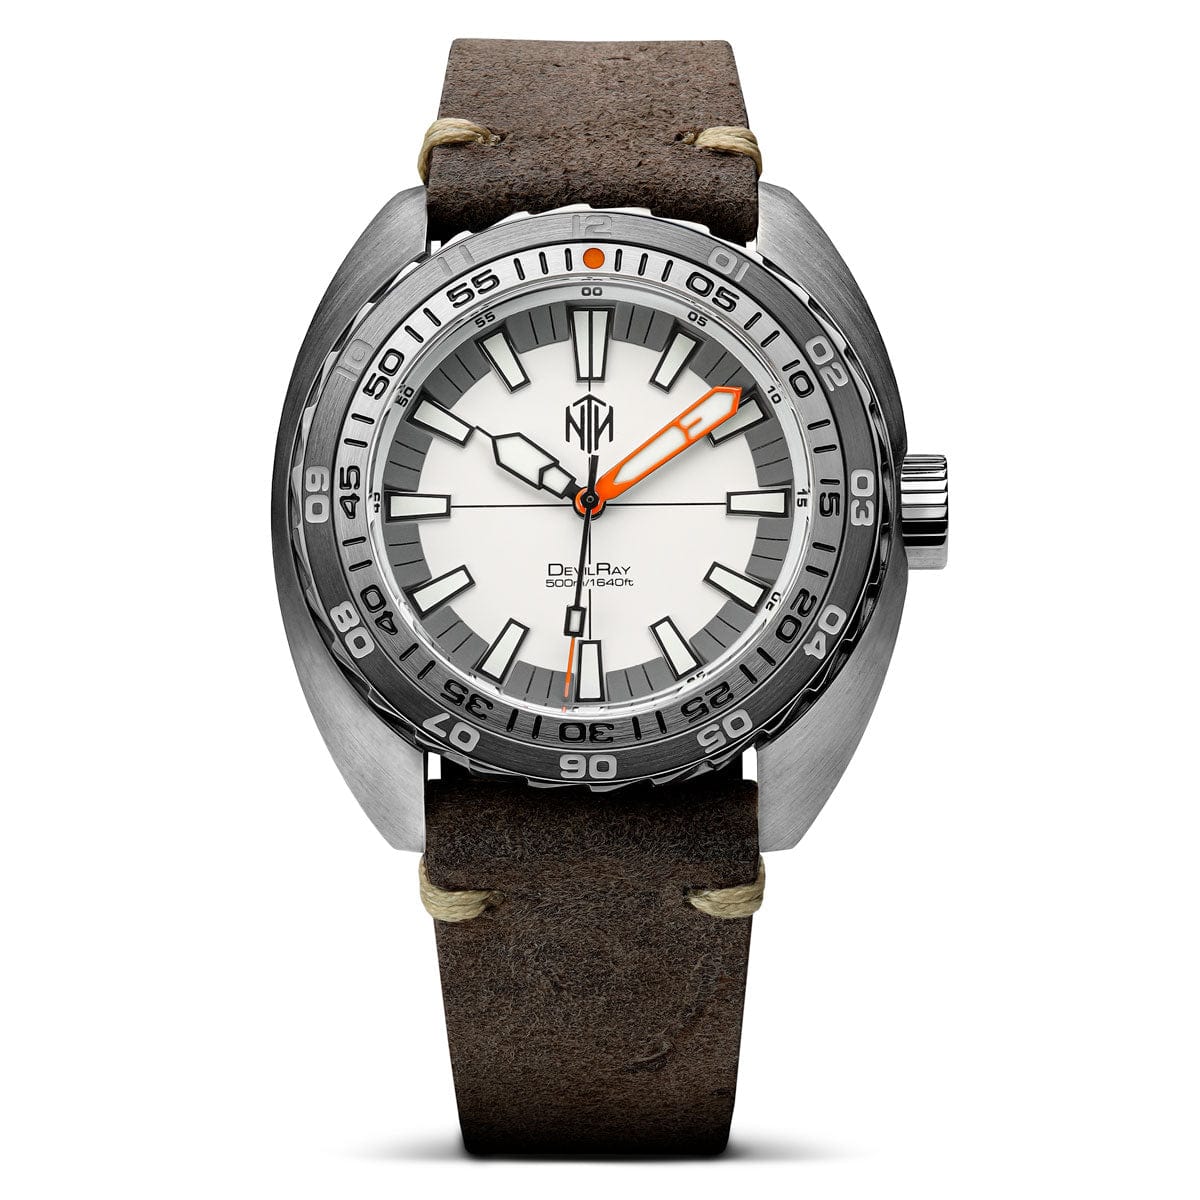 NTH DevilRay Dive Watch - White - Leather Strap - WatchGecko Exclusive